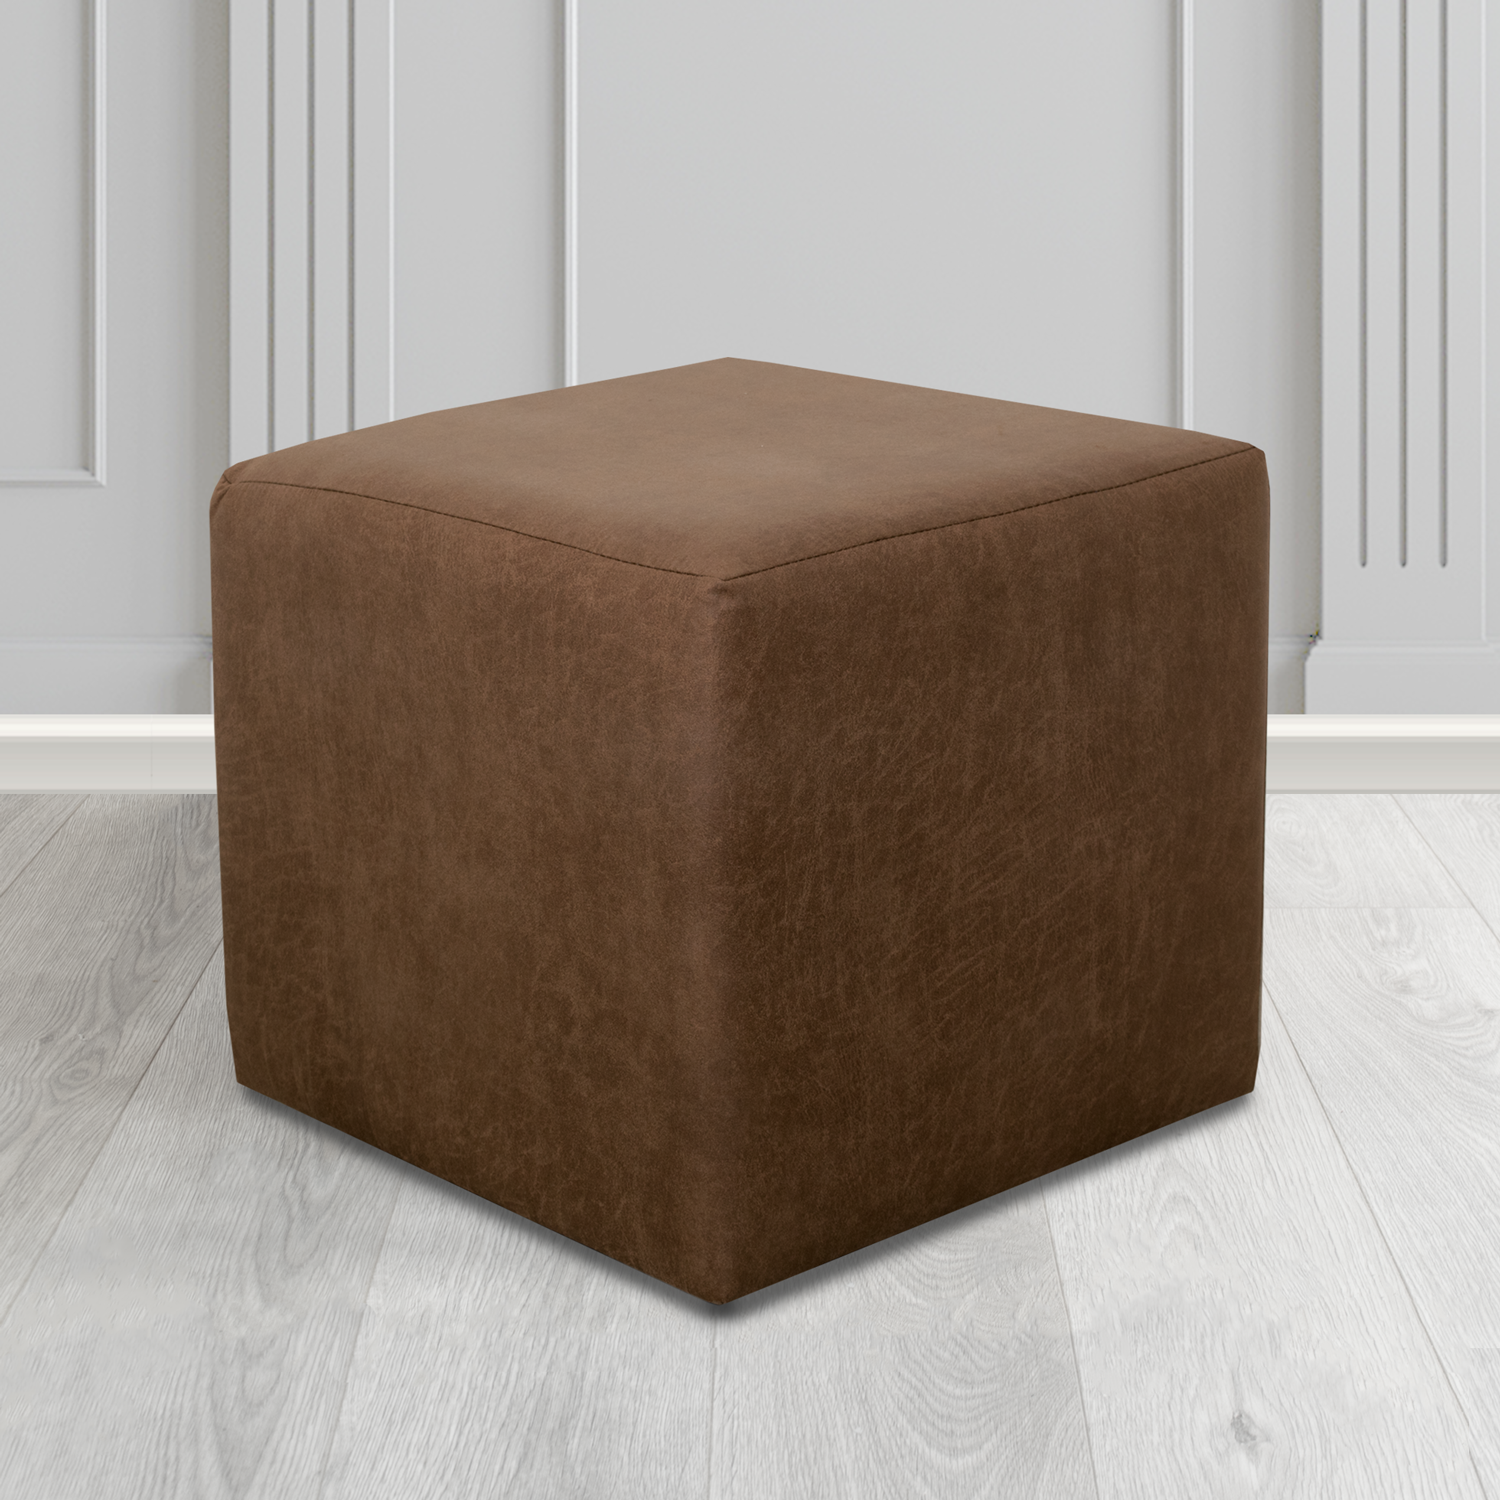 Paris Nevada Chocolate Faux Leather Cube Footstool - The Tub Chair Shop